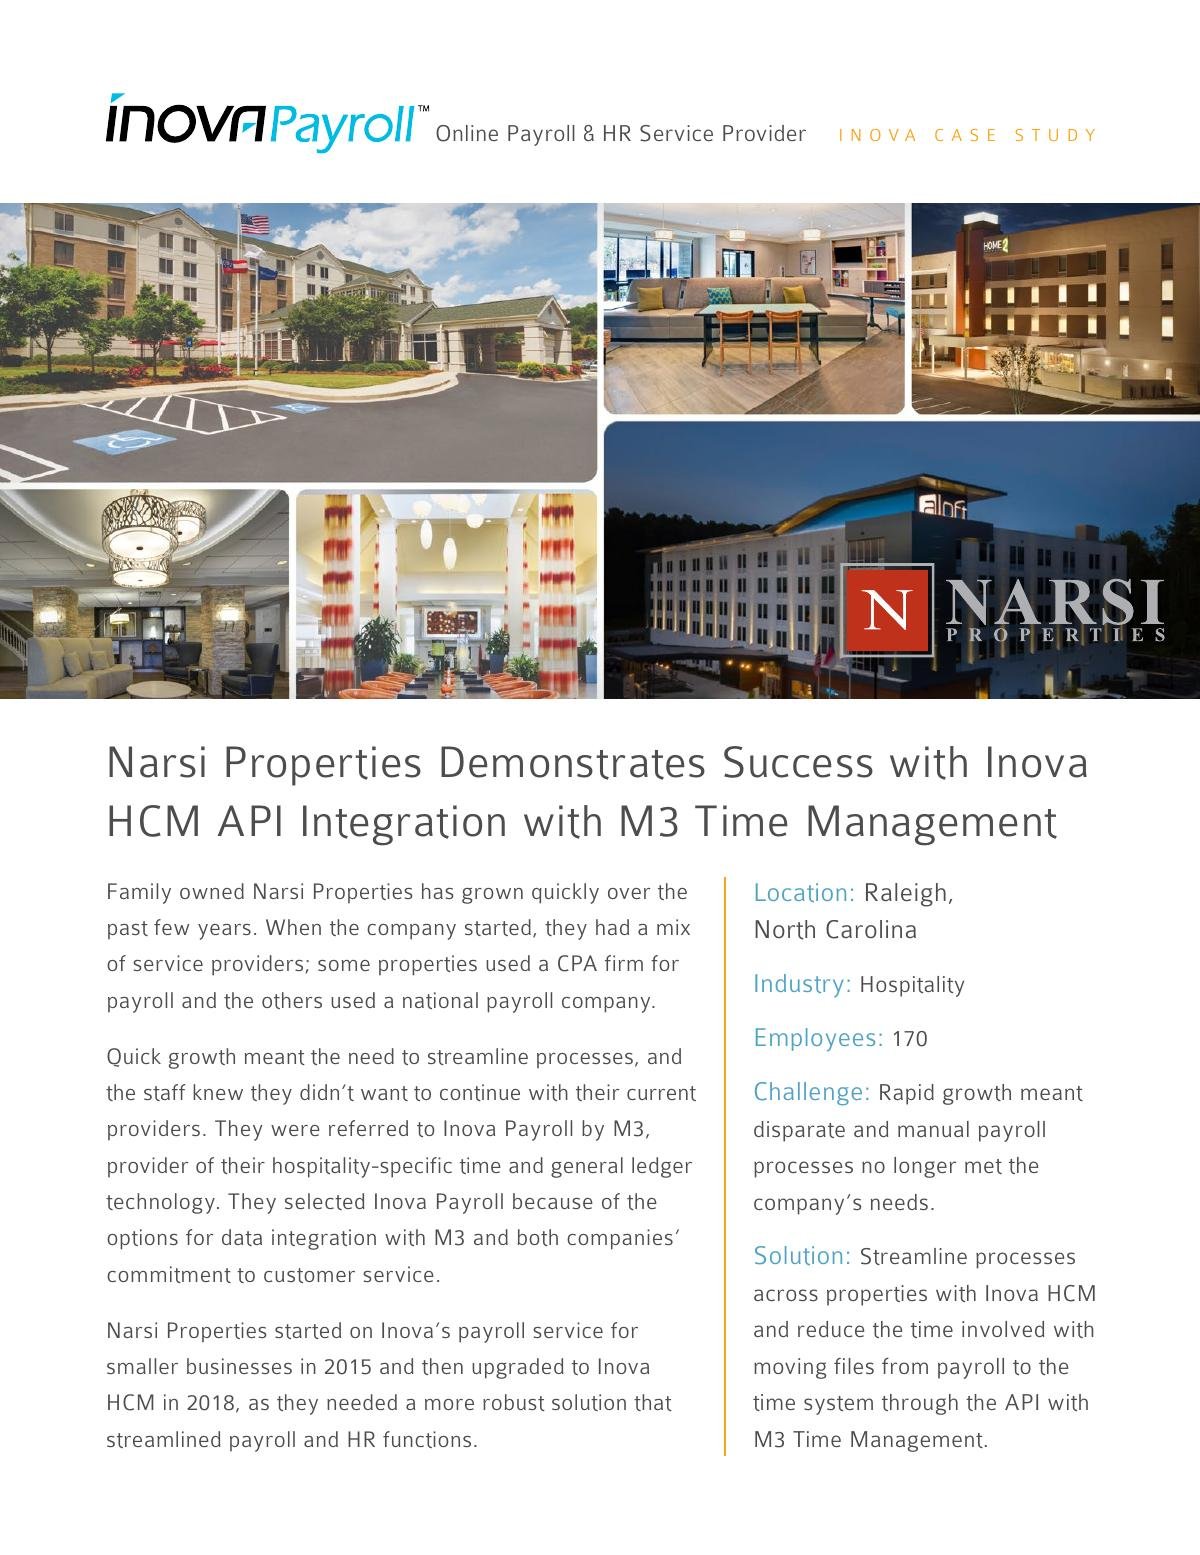 Narsi Properties Demonstrates Success with Inova HCM API Integration with M3 Time Management